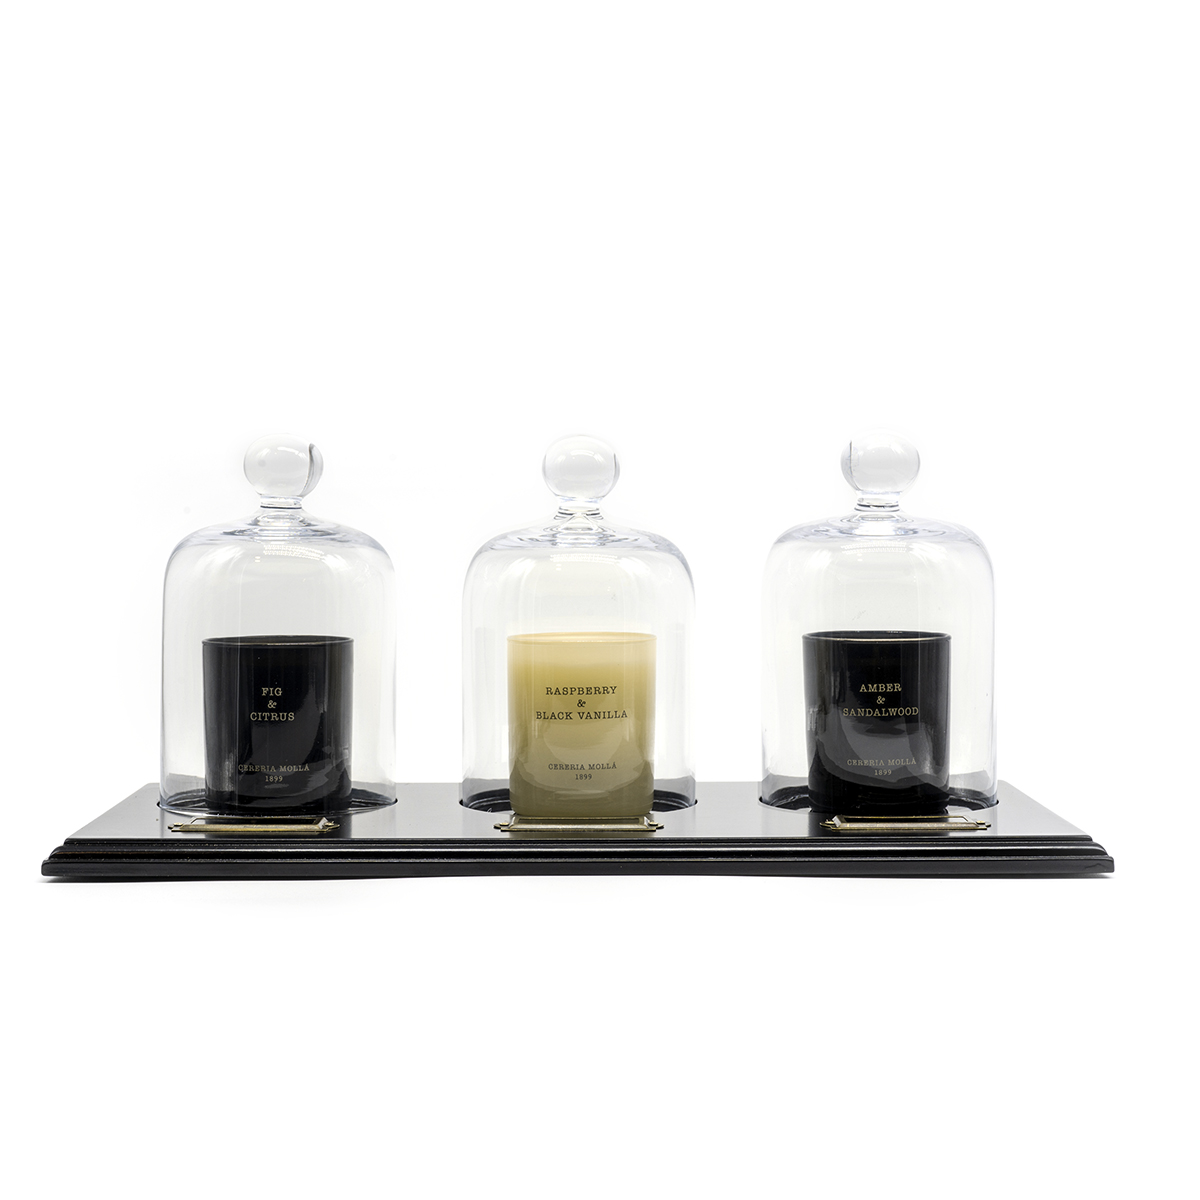 Black Furniture Display With 3 Glass Domes Gift